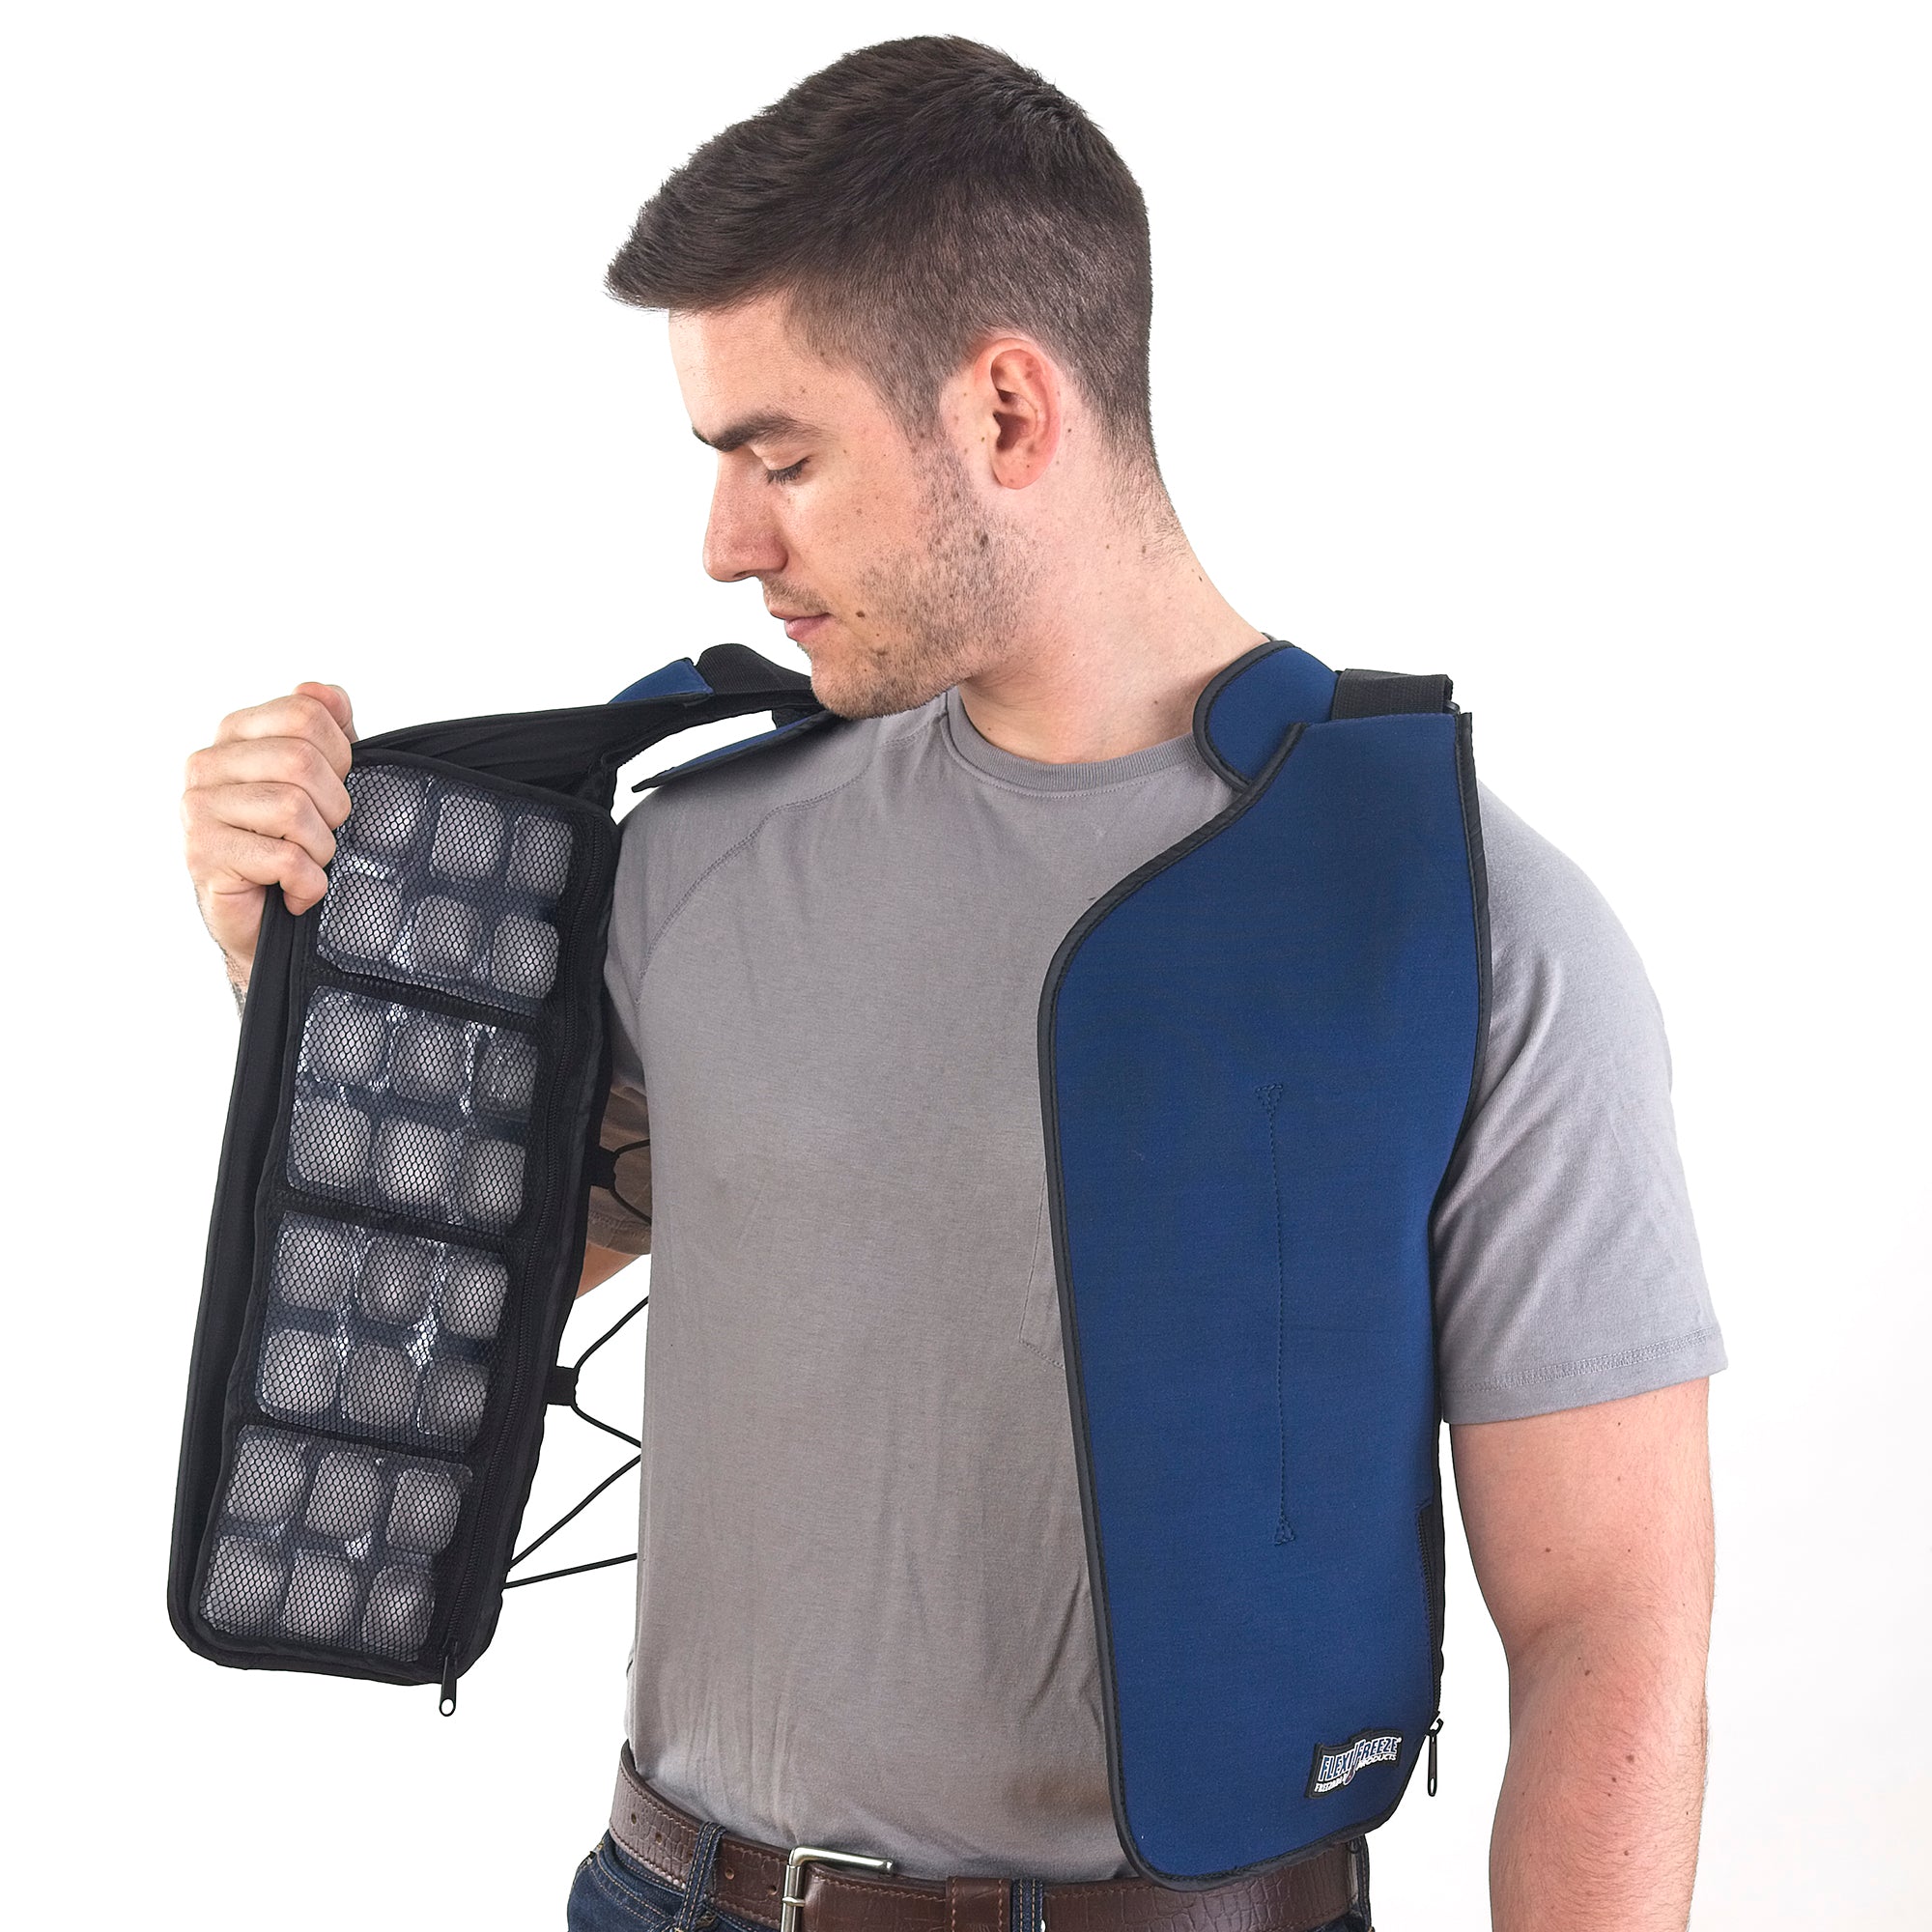 Personal Series Cooling Kit - blue, includes replacement panels, blue ice vest, with gray insulated bag, and FlexiFreeze ice sheet